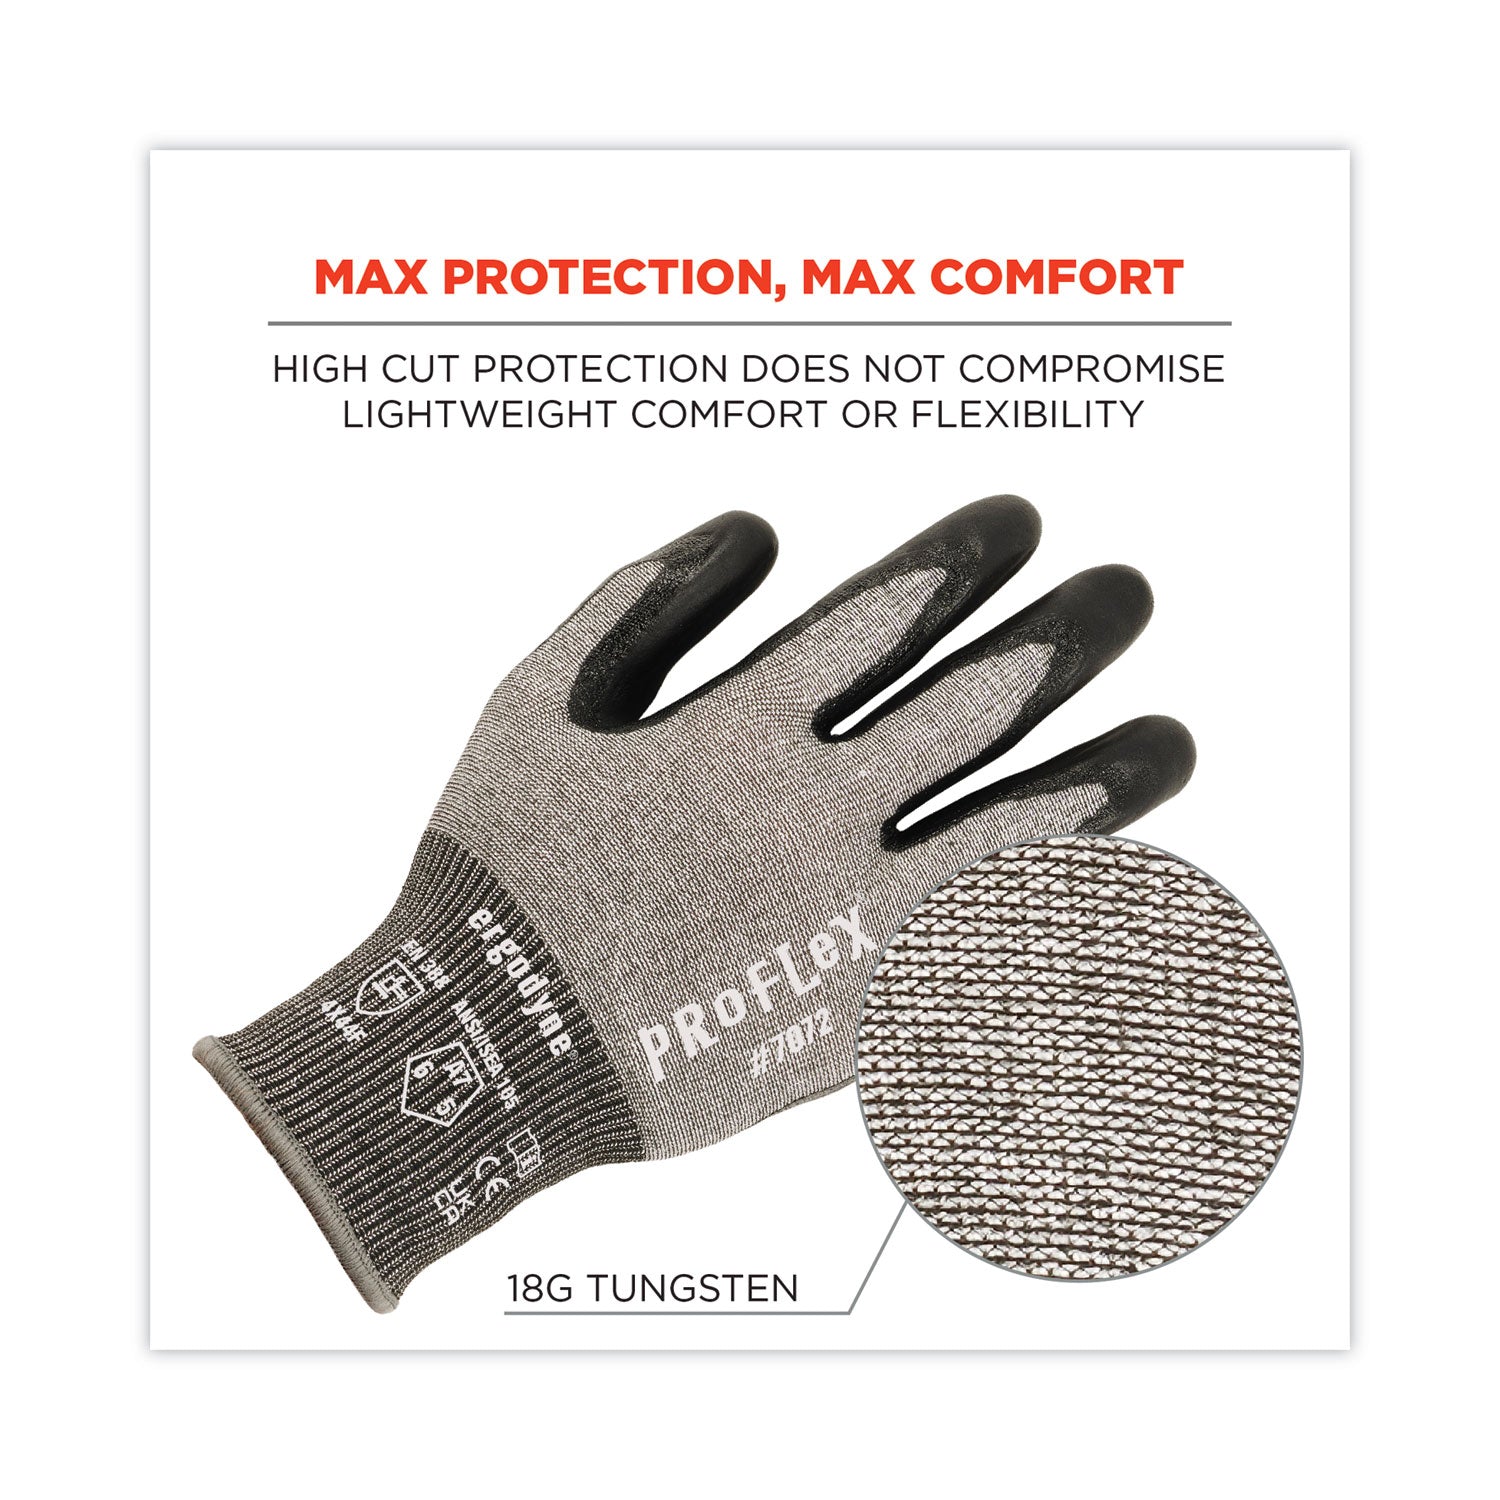 proflex-7072-ansi-a7-nitrile-coated-cr-gloves-gray-2x-large-pair-ships-in-1-3-business-days_ego10316 - 2